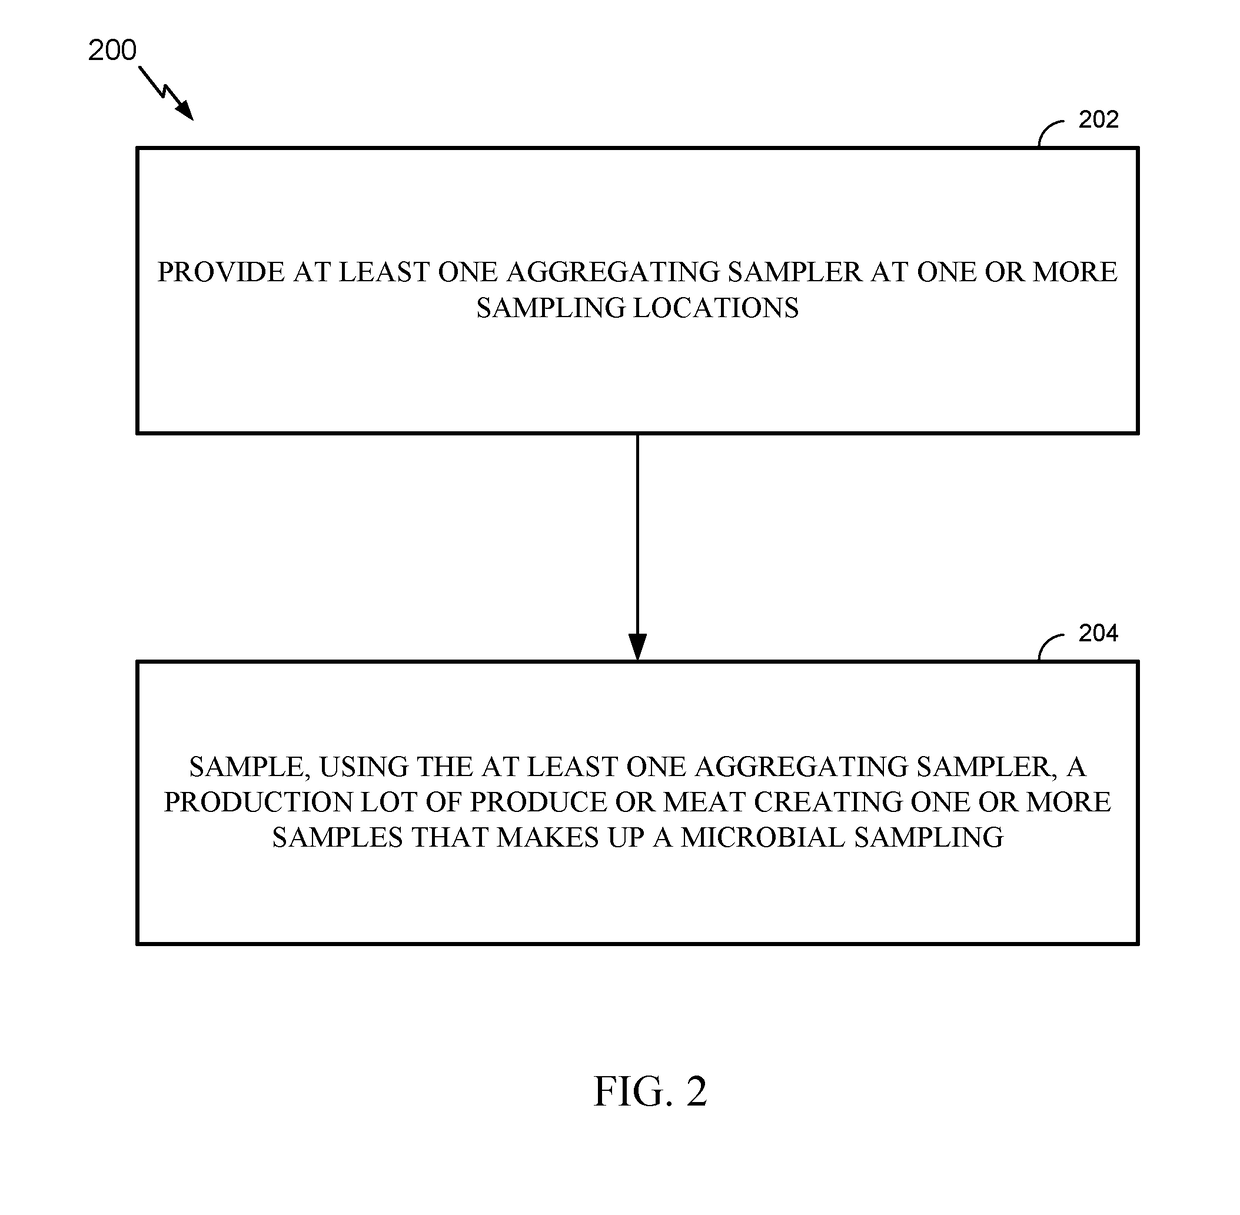 Method and Apparatus for Applying Aggregating Sampling to Food Items